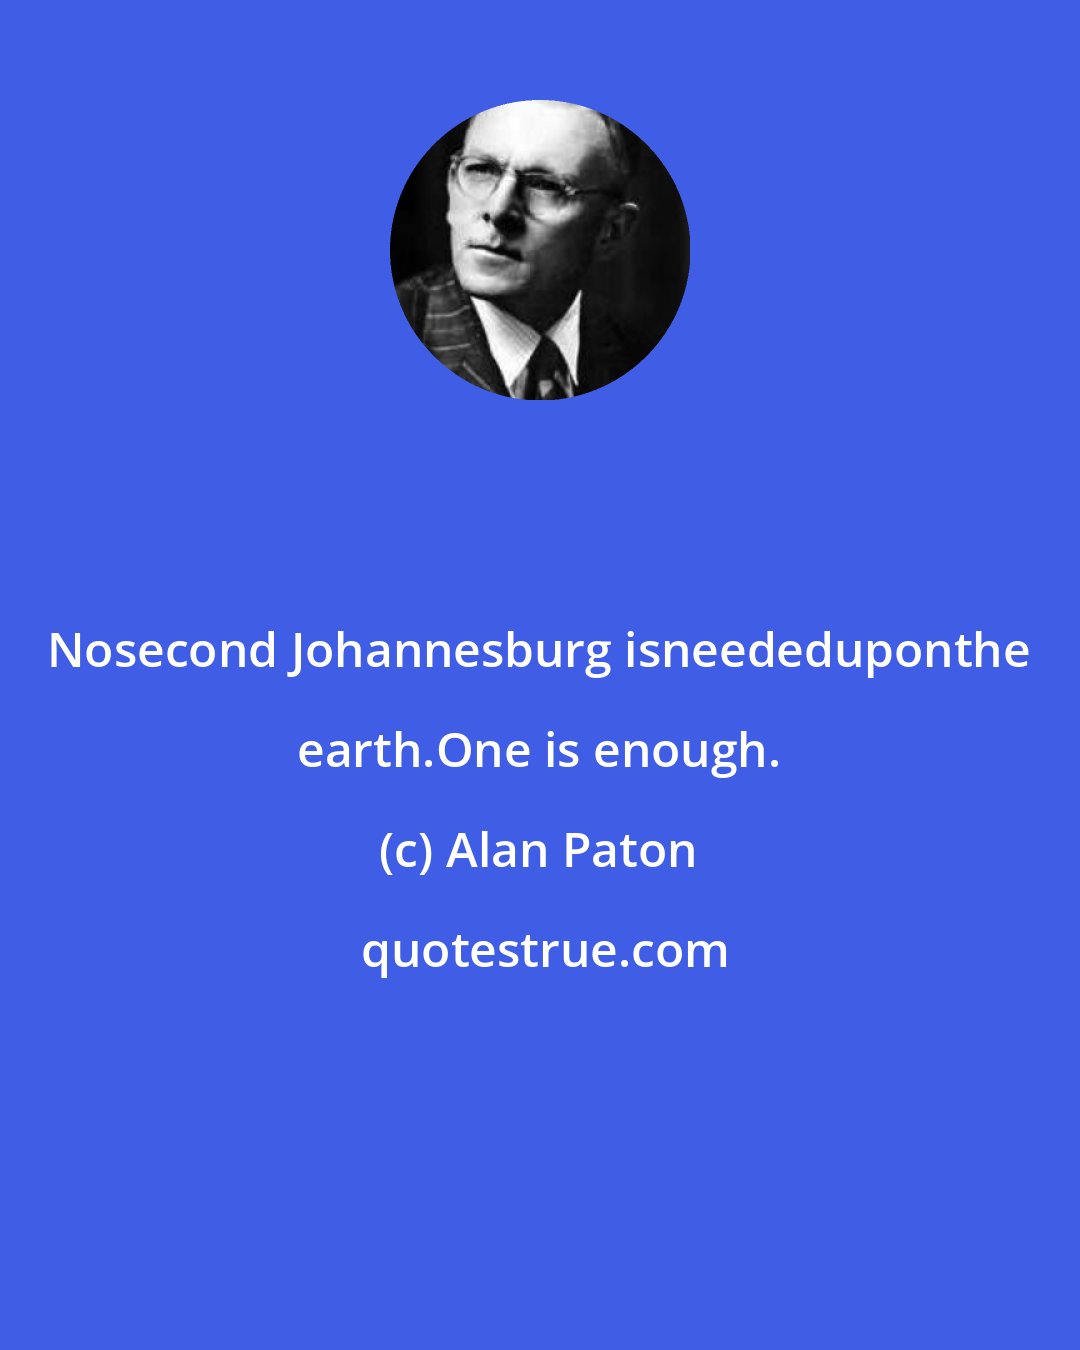 Alan Paton: Nosecond Johannesburg isneededuponthe earth.One is enough.